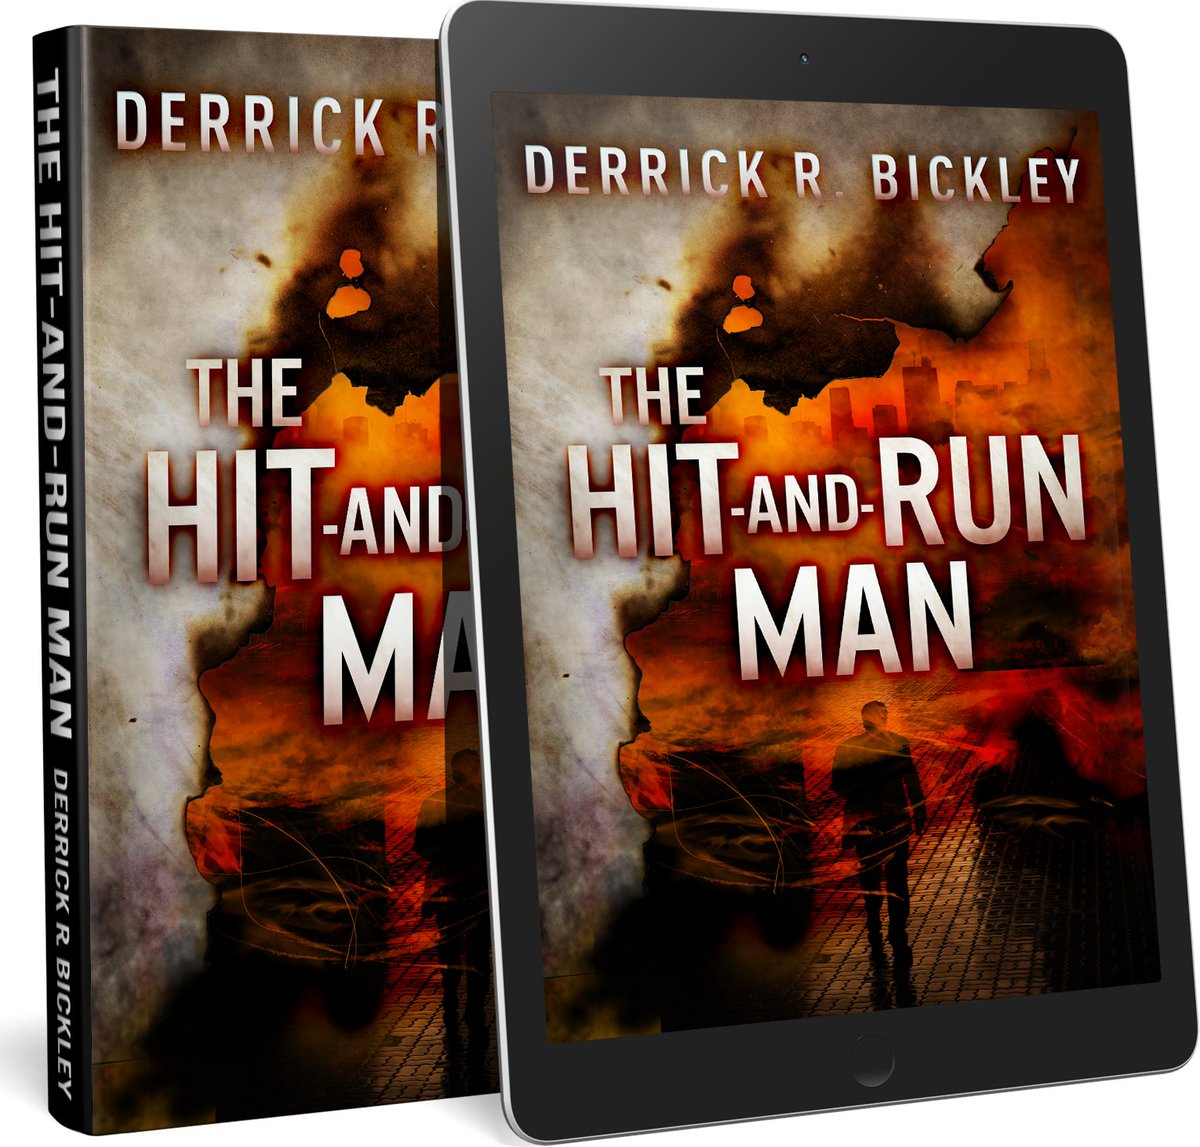 'Great characters and a very clever ending' FIVE/FOUR star reader-acclaimed mybook.to/TheHitAndRunMan THE HIT-AND-RUN MAN at #Kindle or your favourite digital store in PAPERBACK HARDBACK (Amzn inc L/Print B&N inc L/Print Wmart) AUDIOBOOK #crimethriller #mustread #crime #koboplus